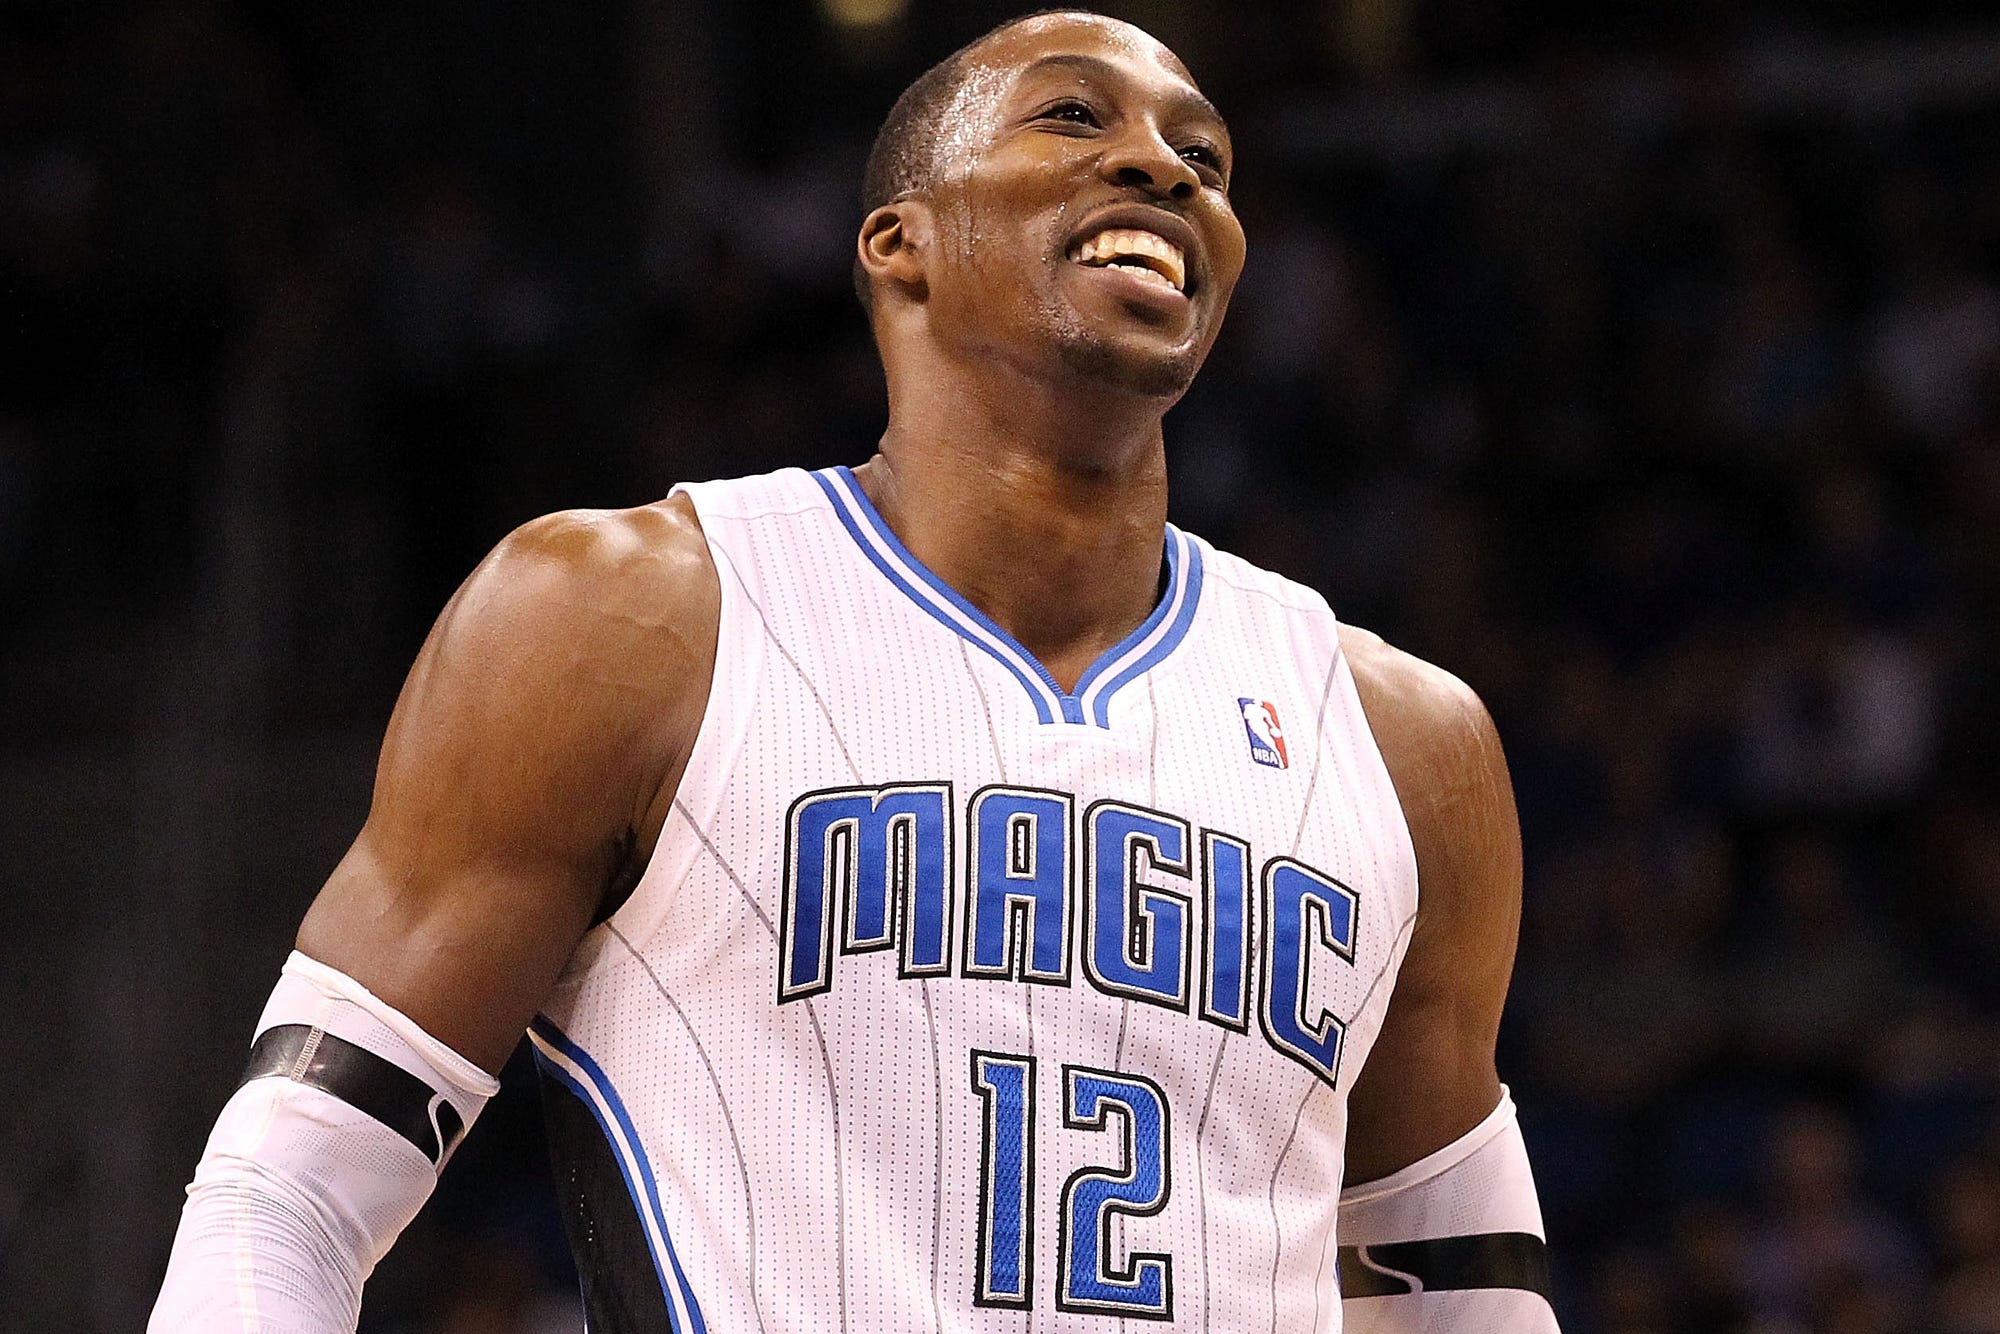 Is there still a place for Dwight Howard in the modern NBA?